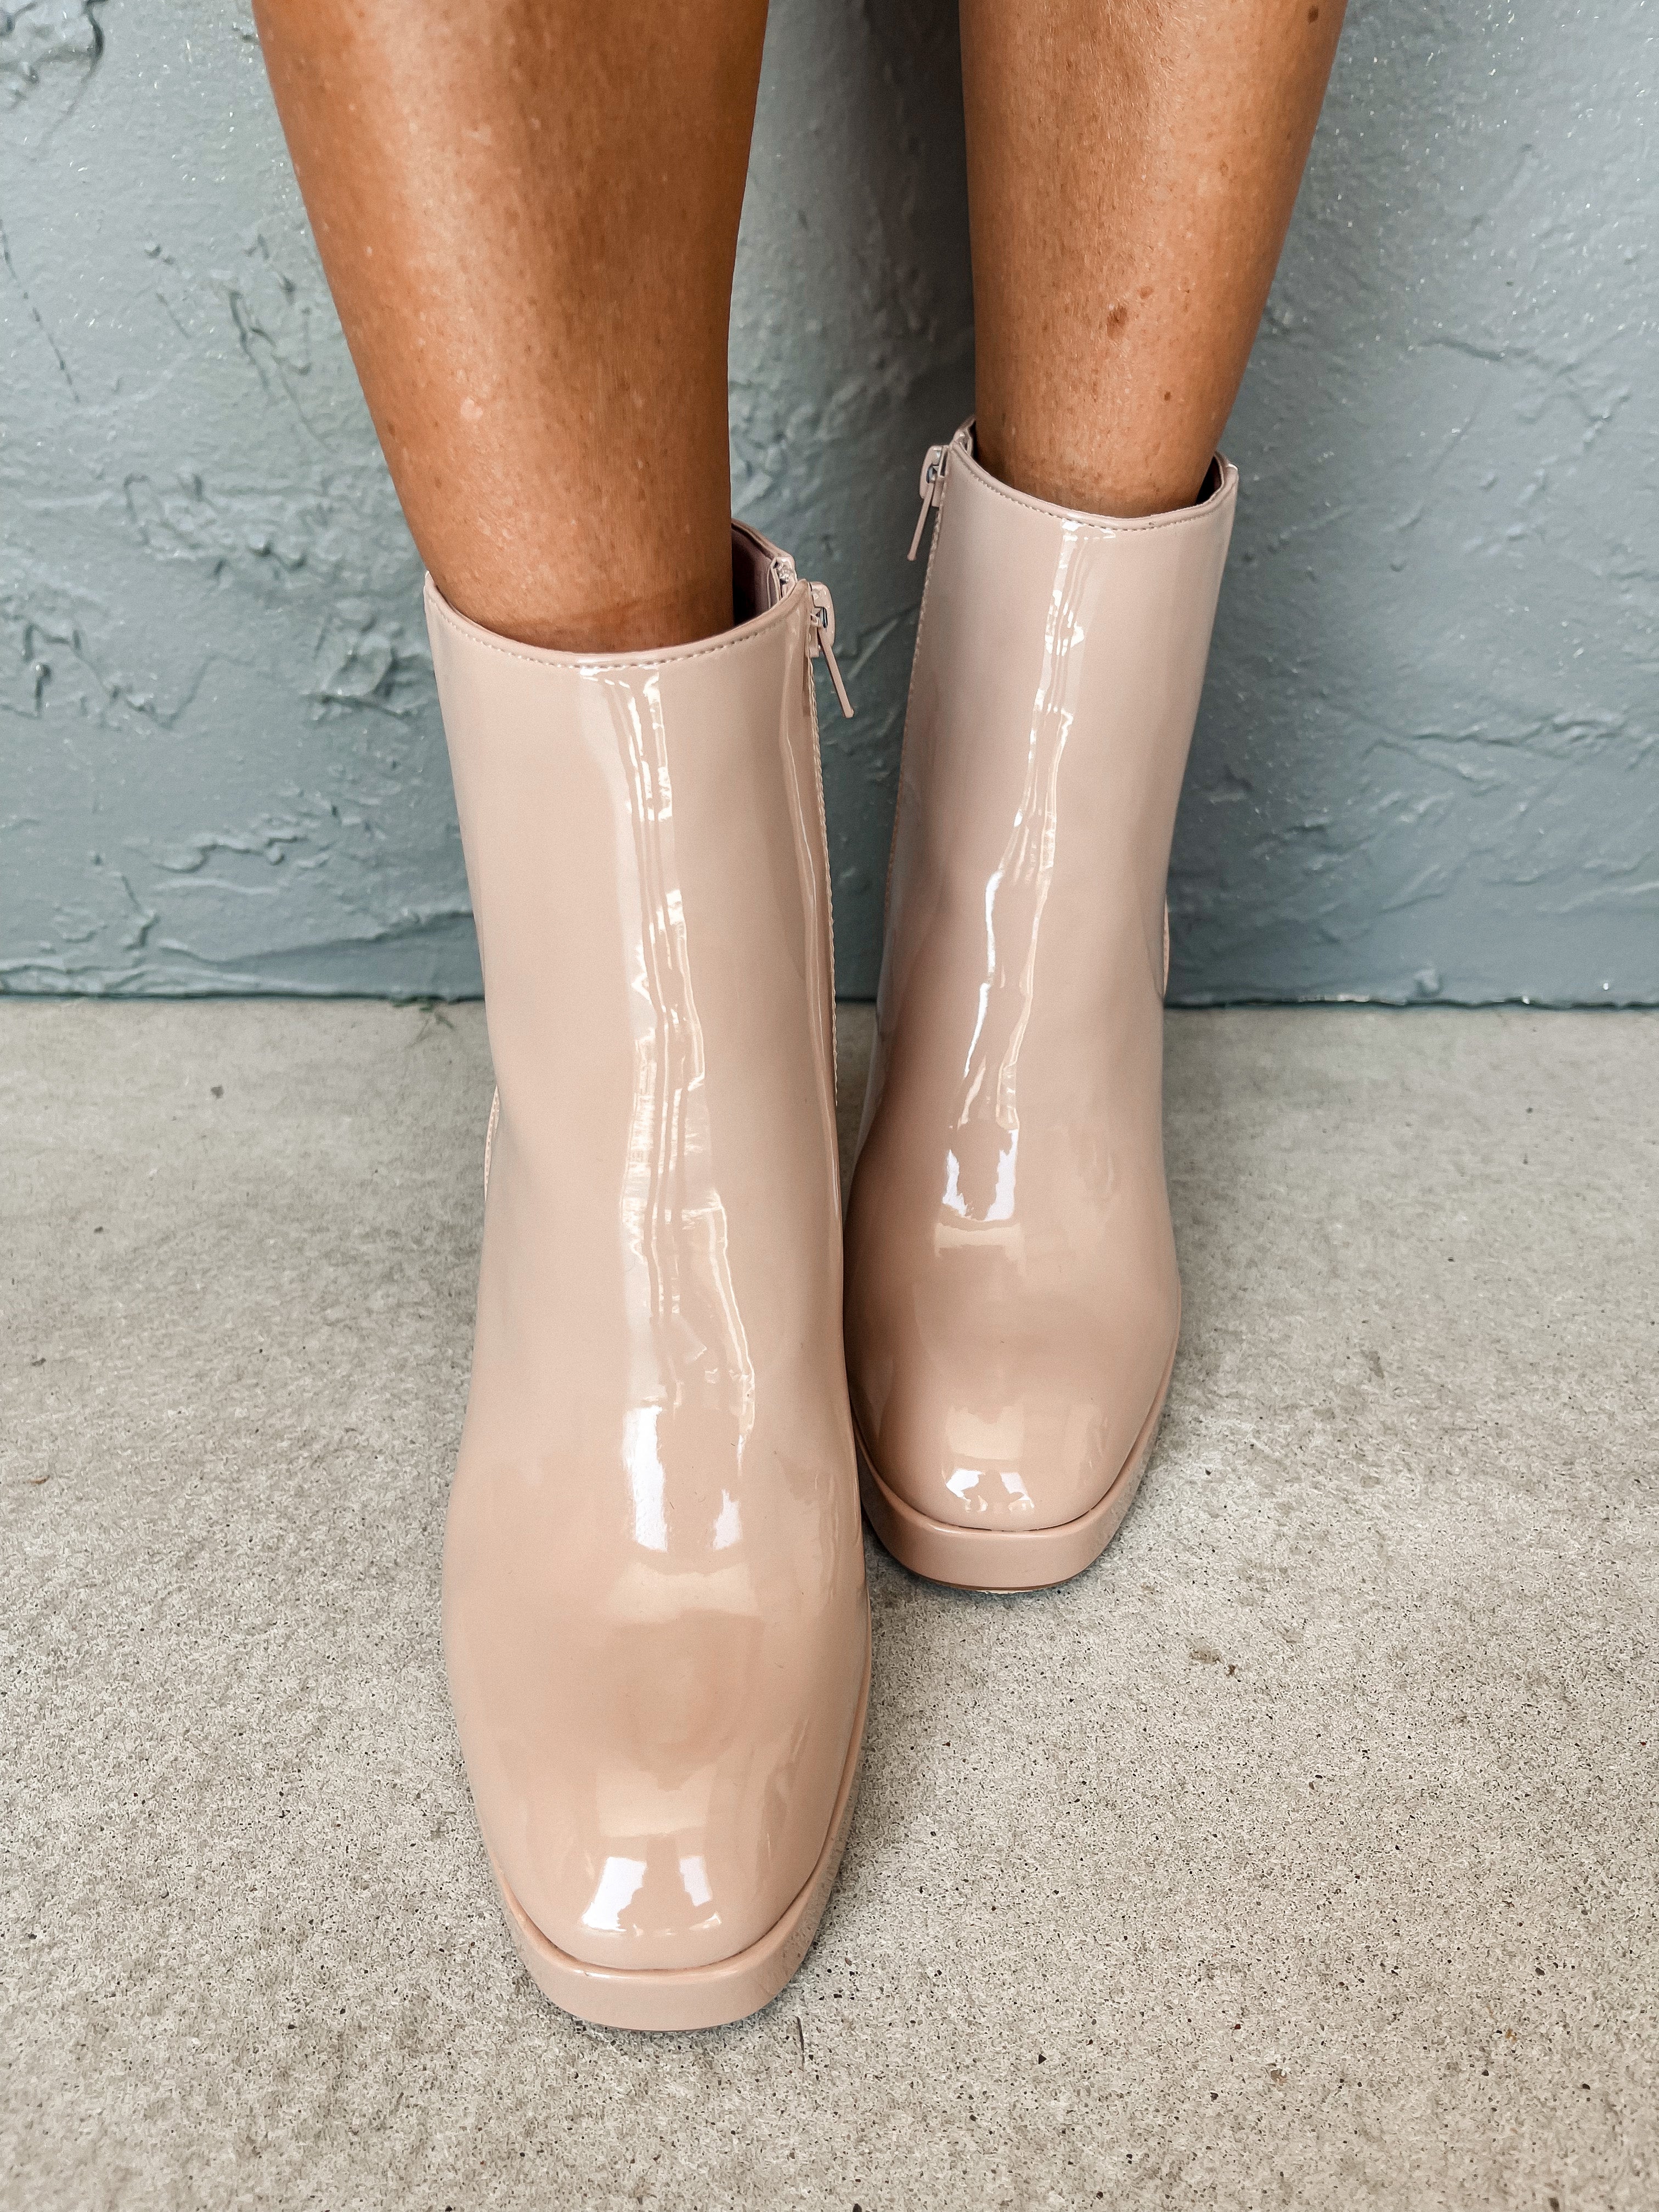 [ShuShop] Wadi Patent Ankle Boot-Nude